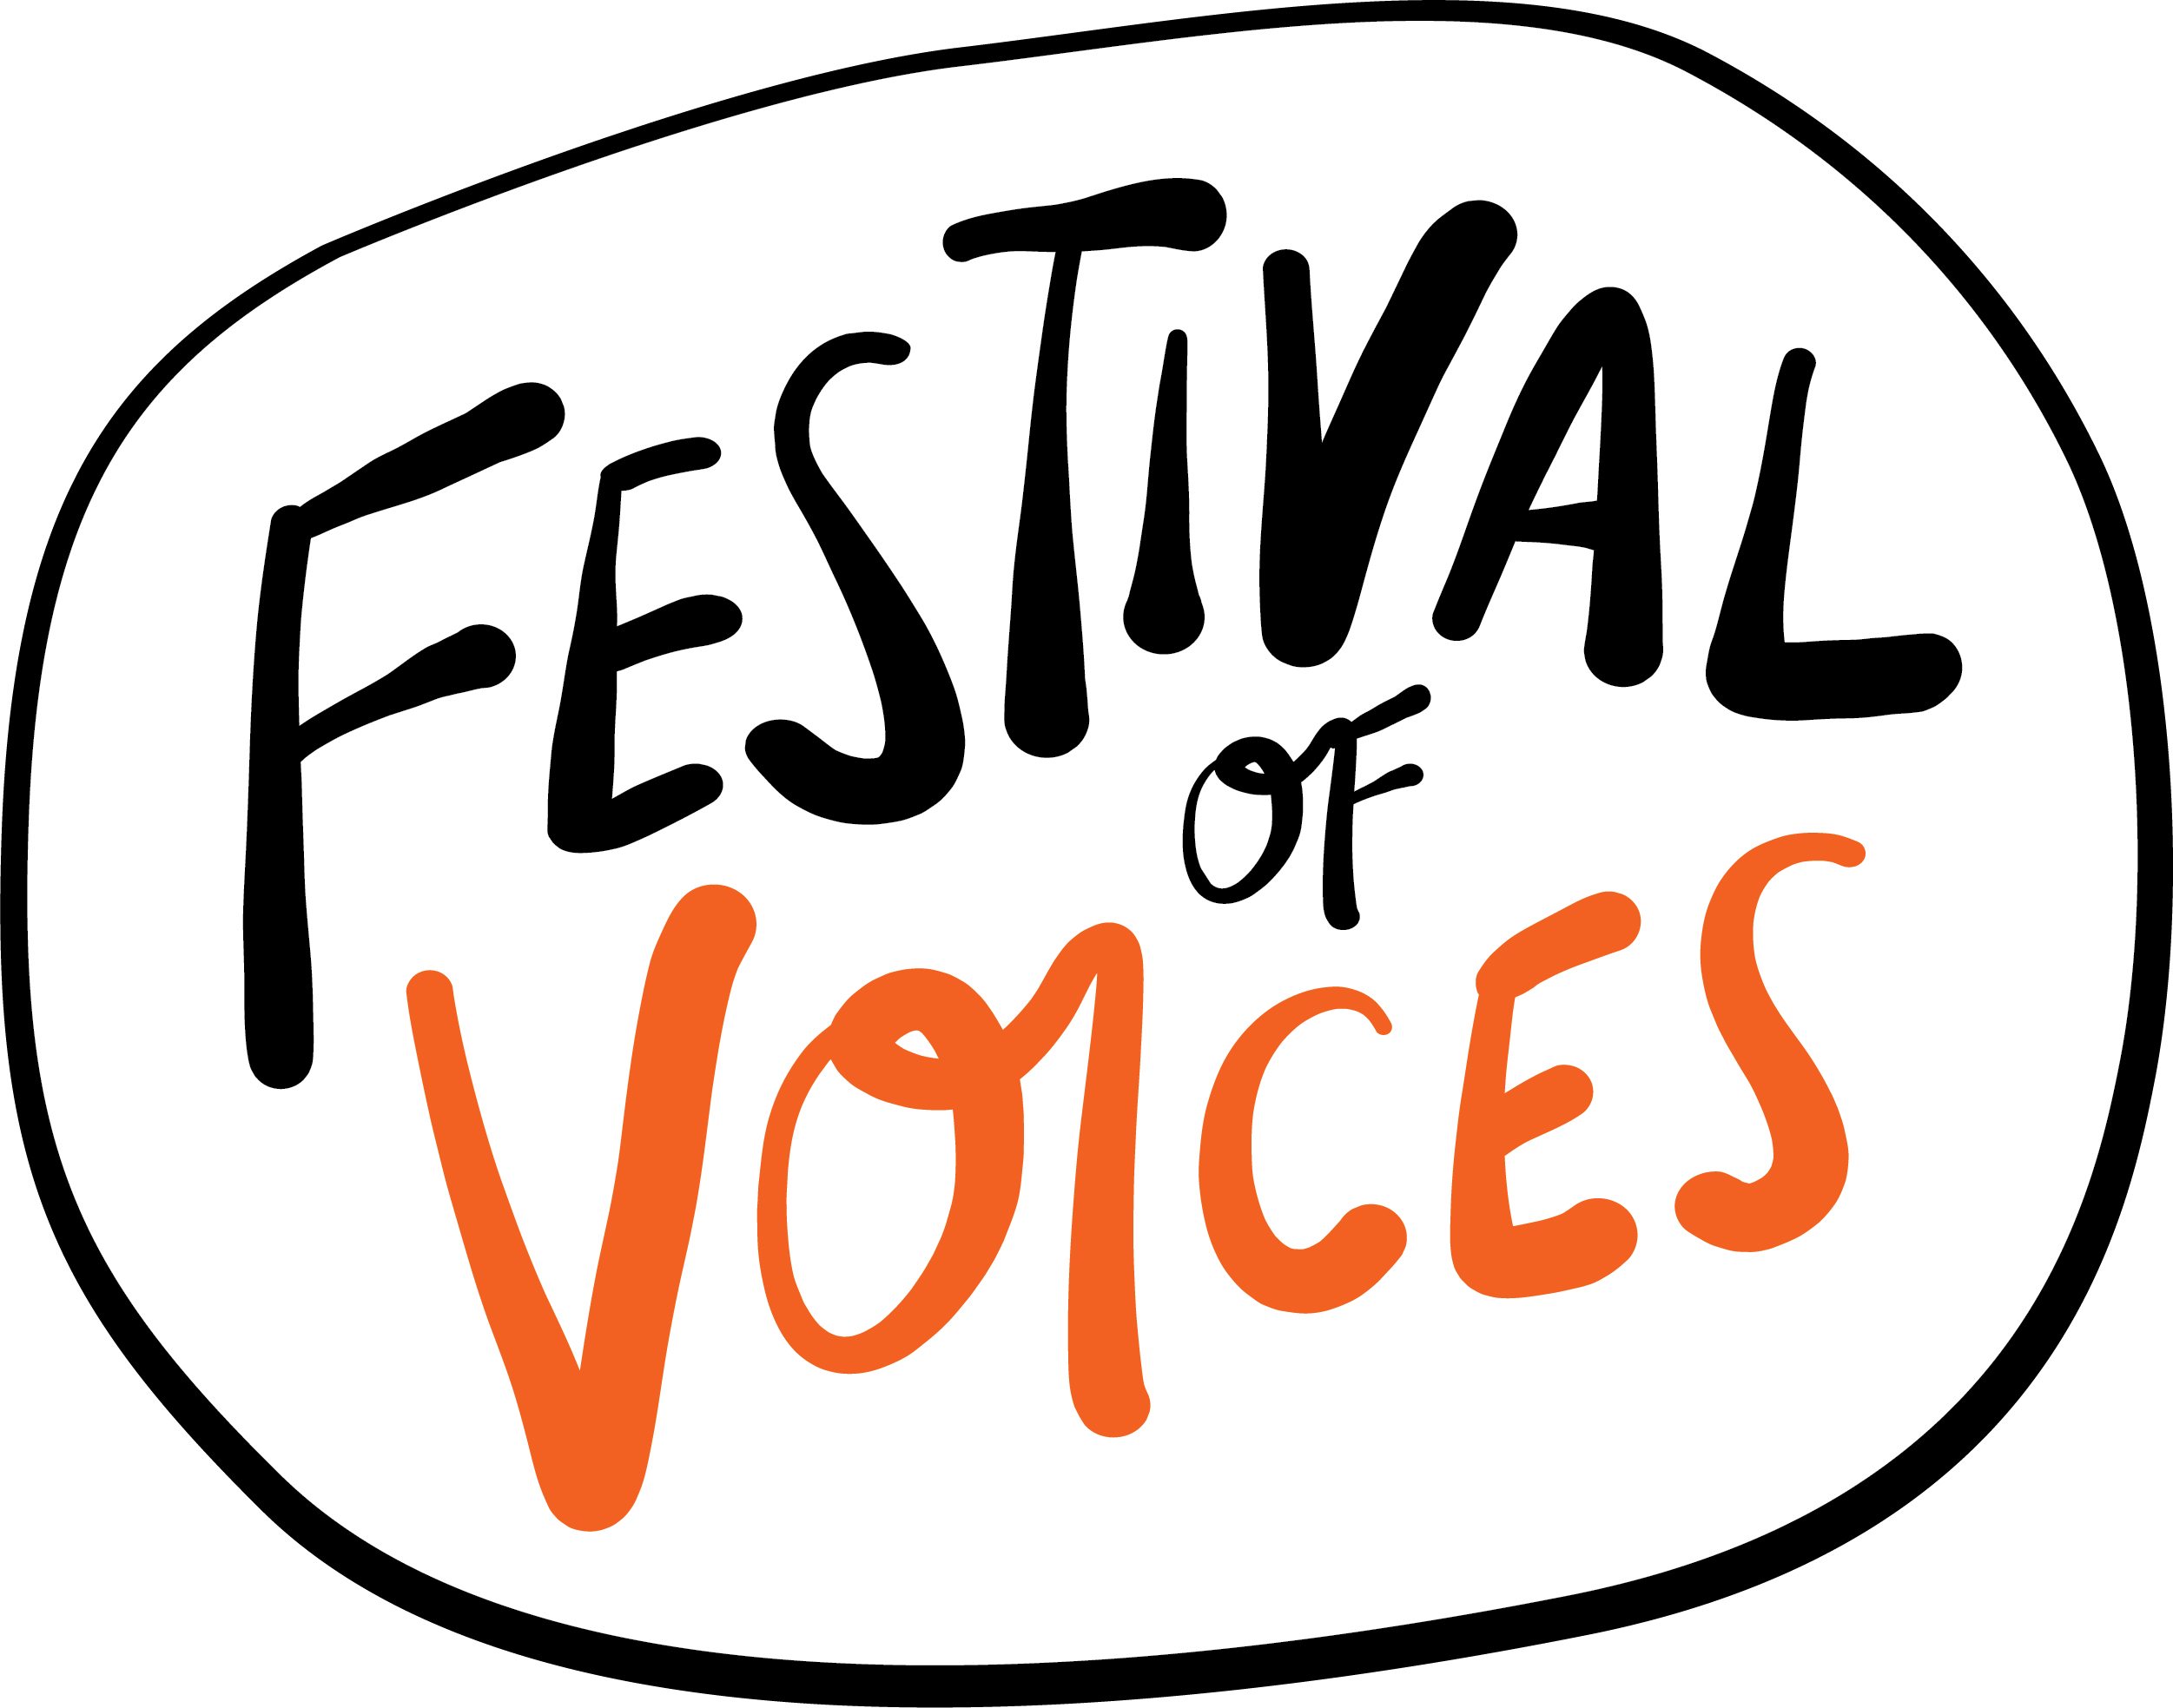 Festival of Voices